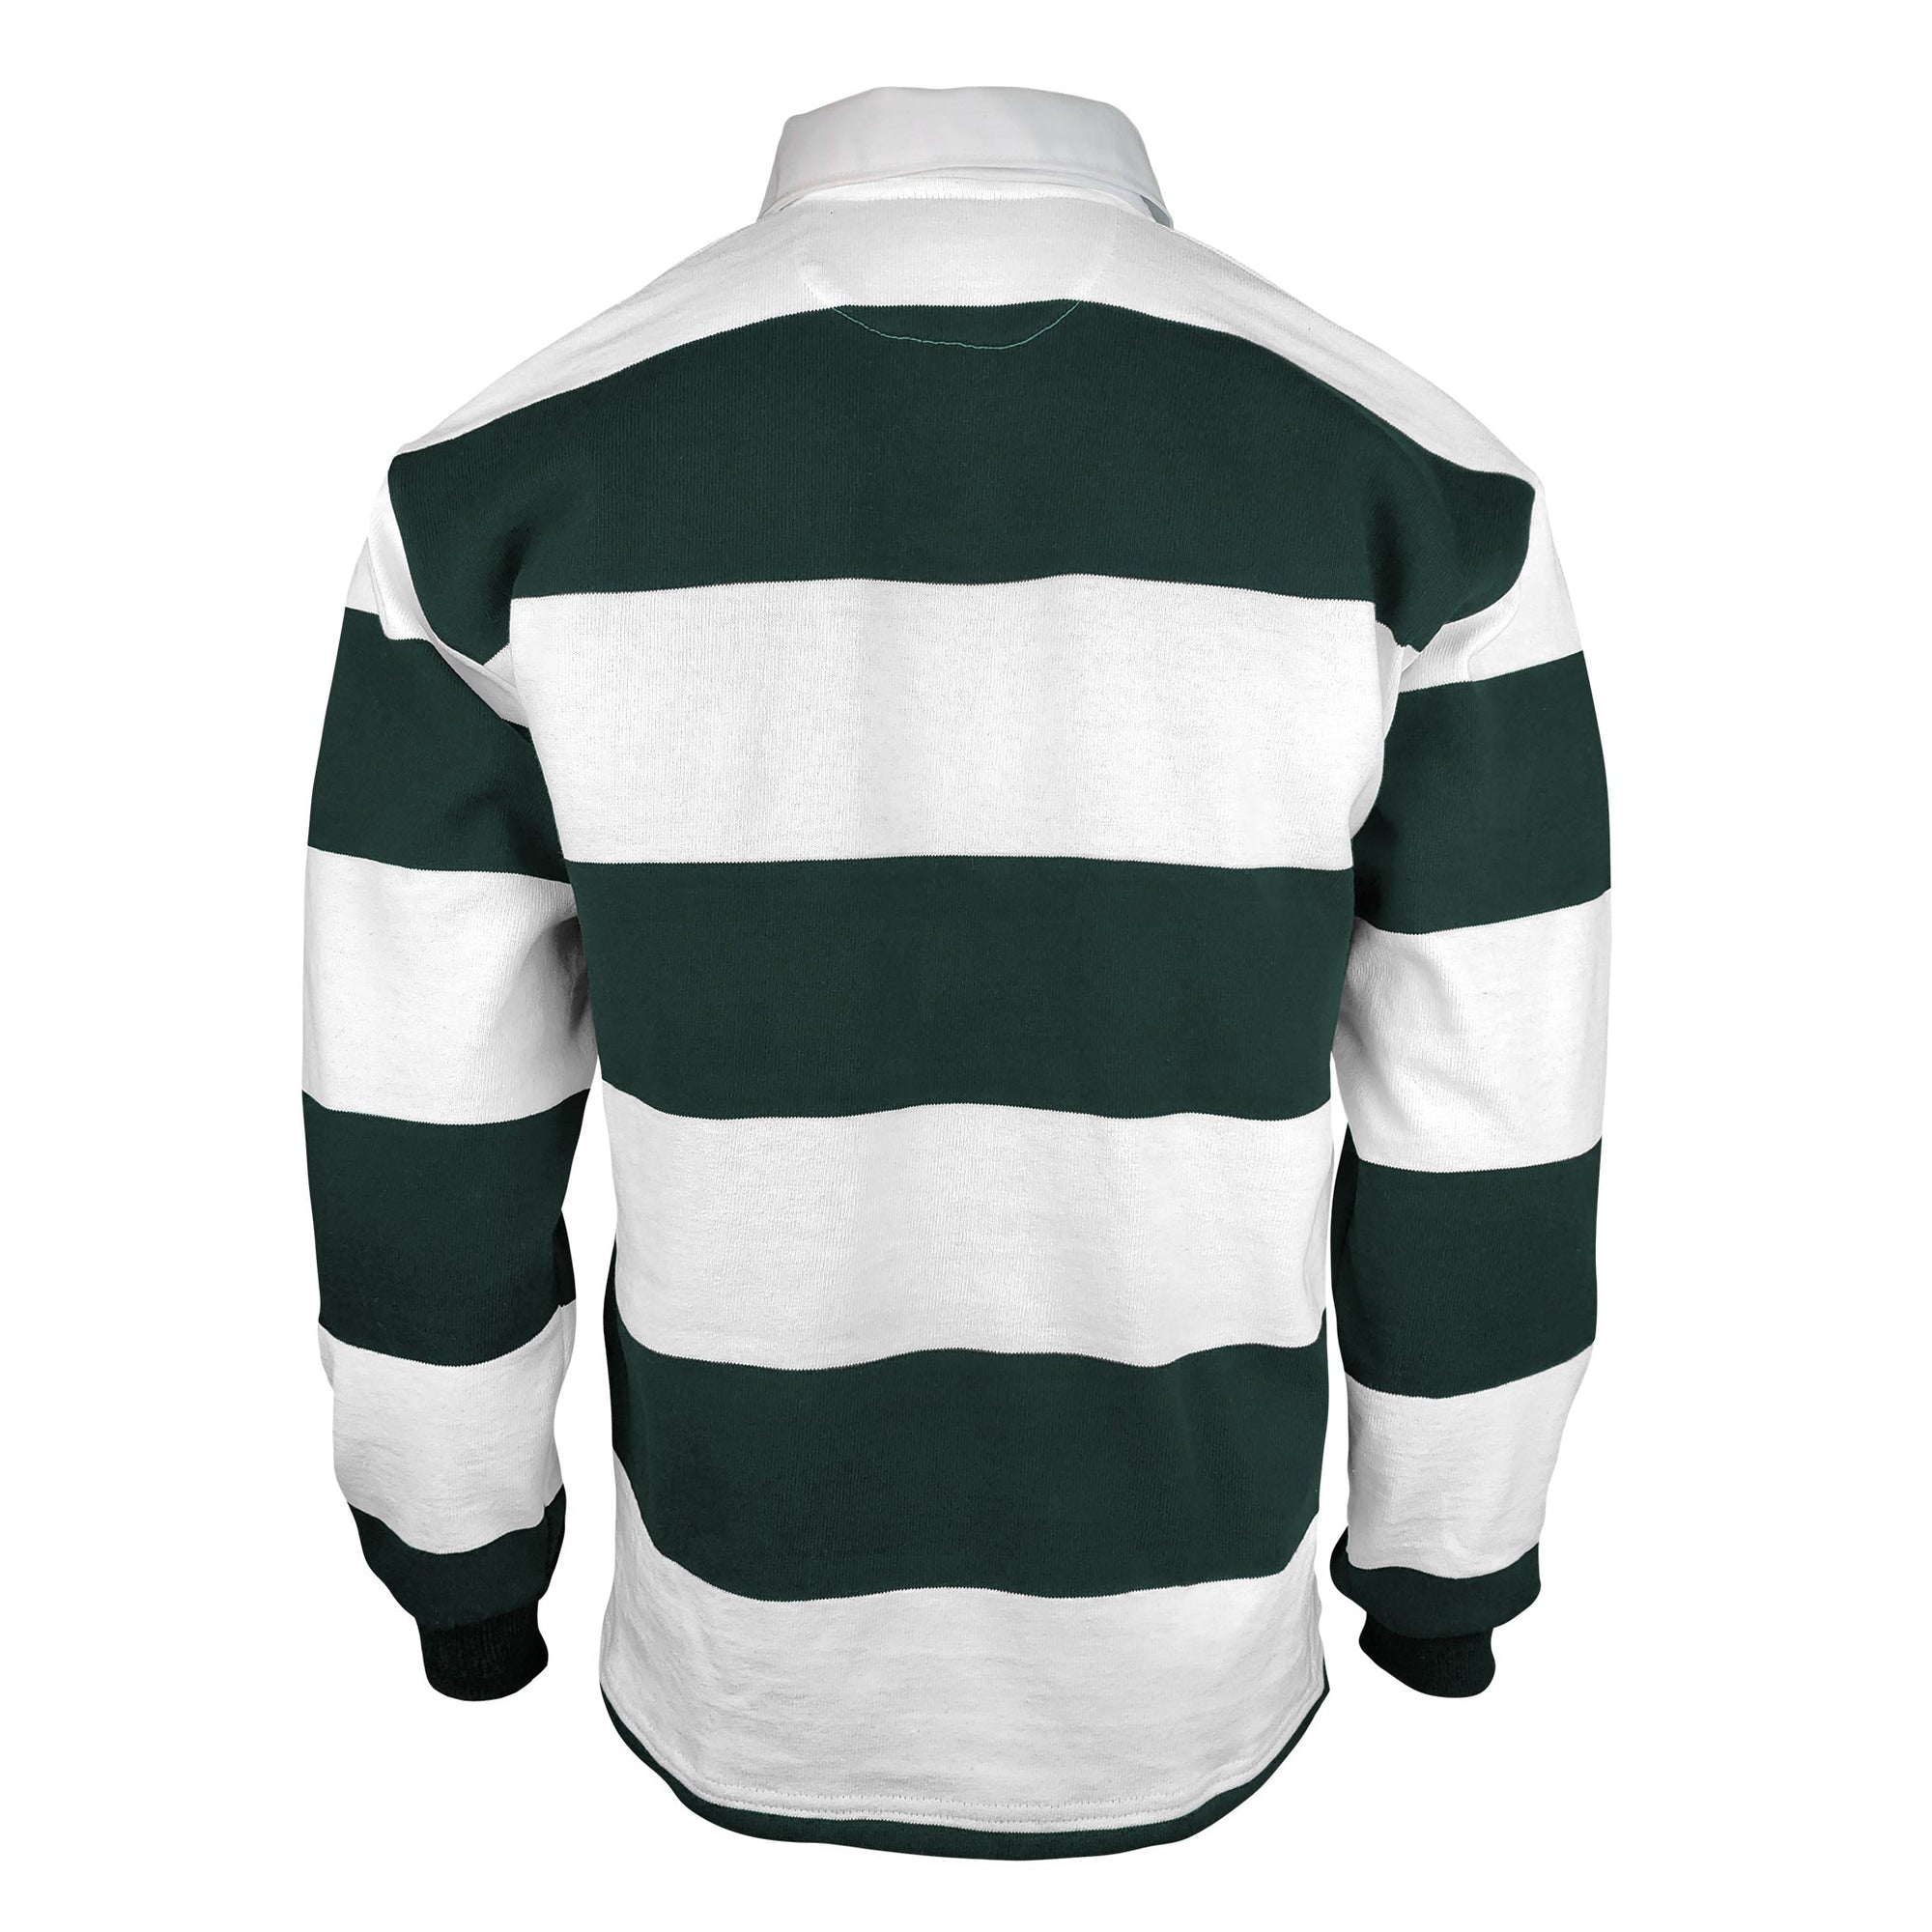 Rugby Imports Lake County Casual Weight Stripe Jersey